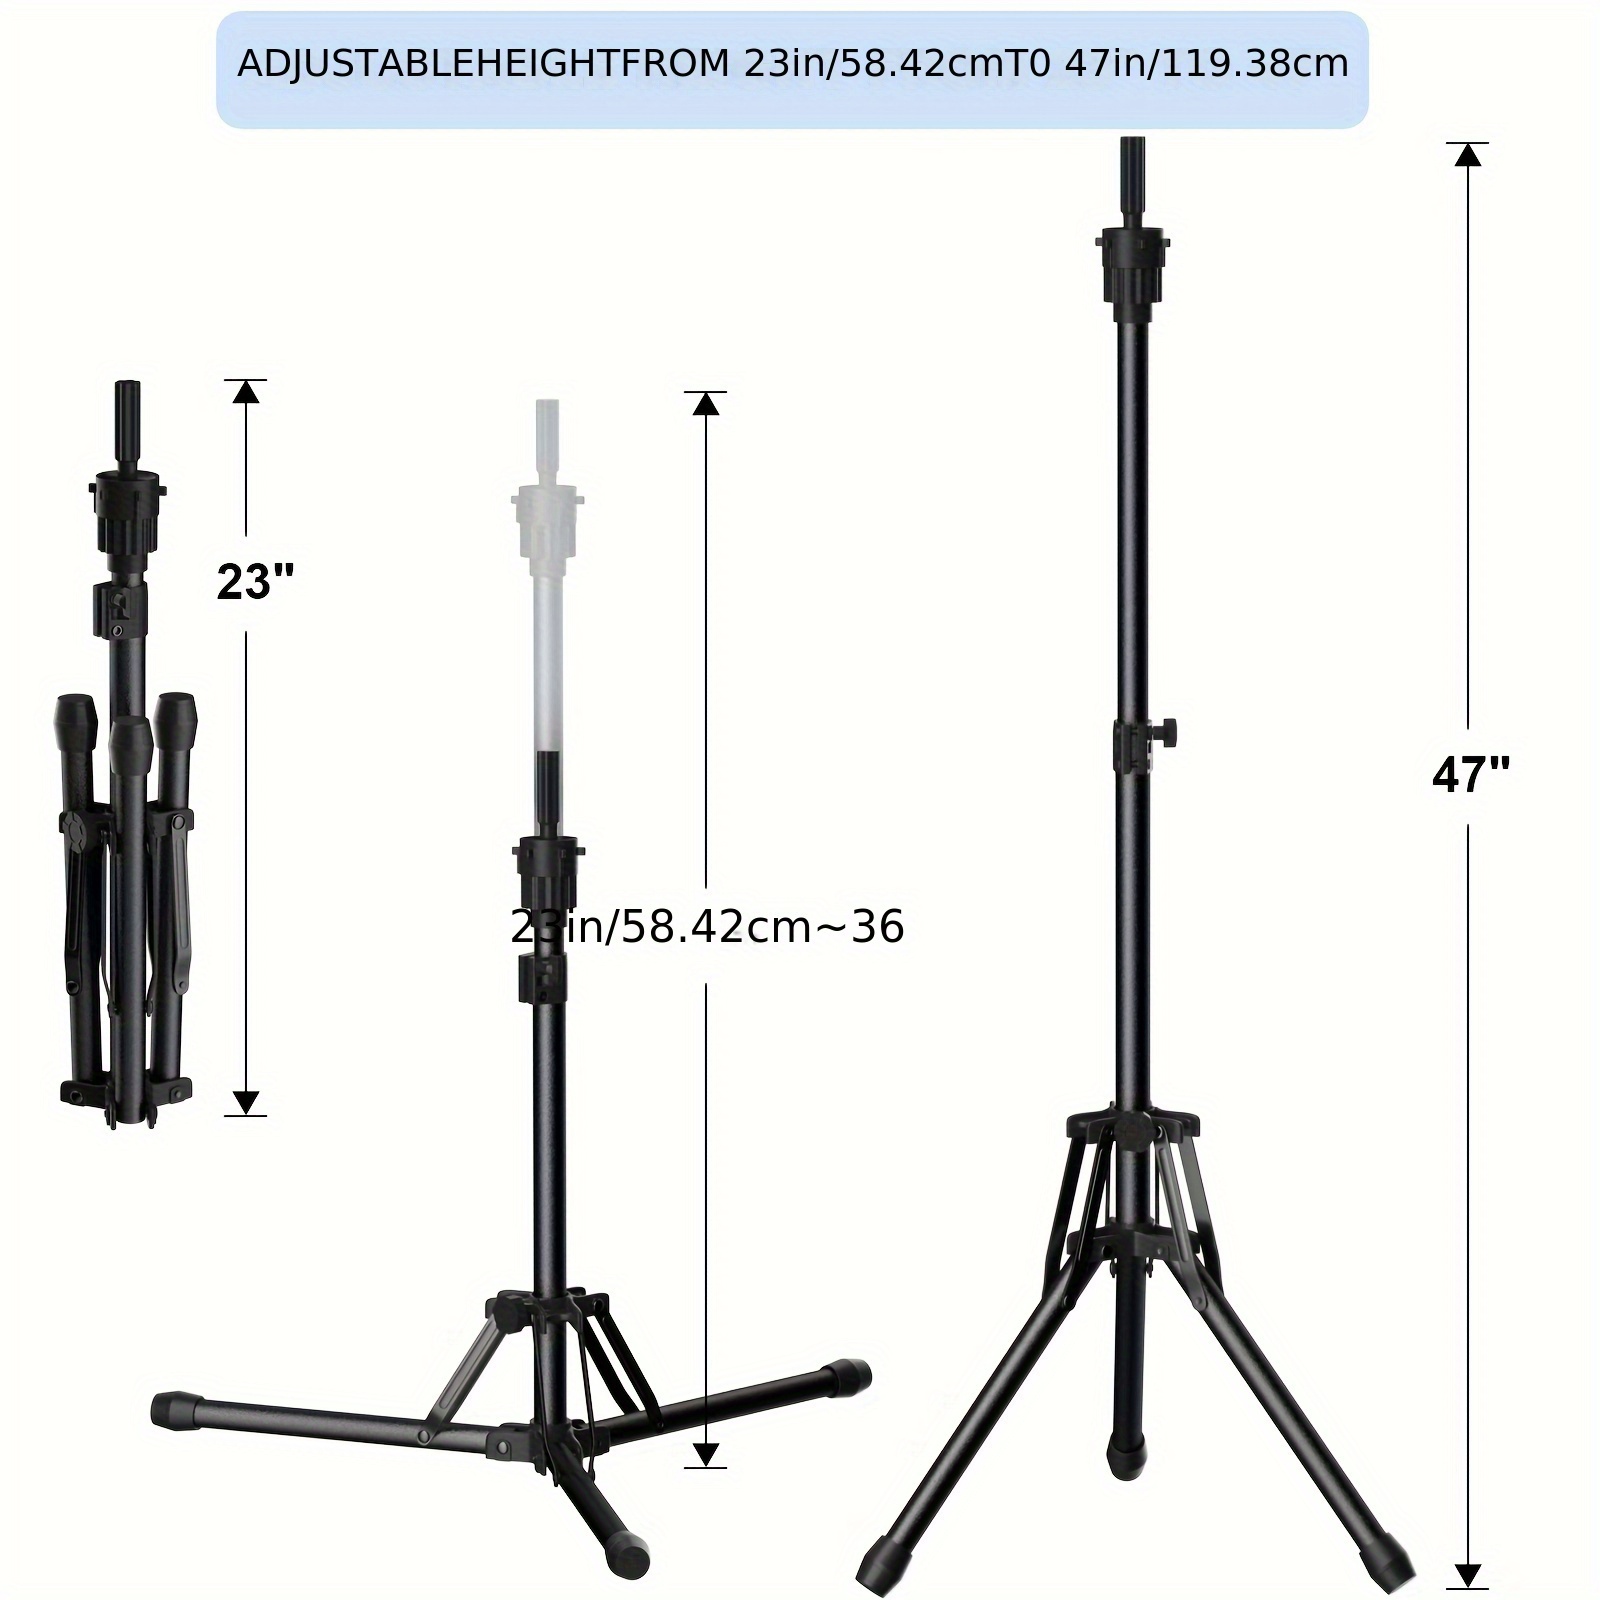 Wig Head Stand, Anself Mini Adjustable Wig stand Tripod,Hairdresser Table  Training Head Stand